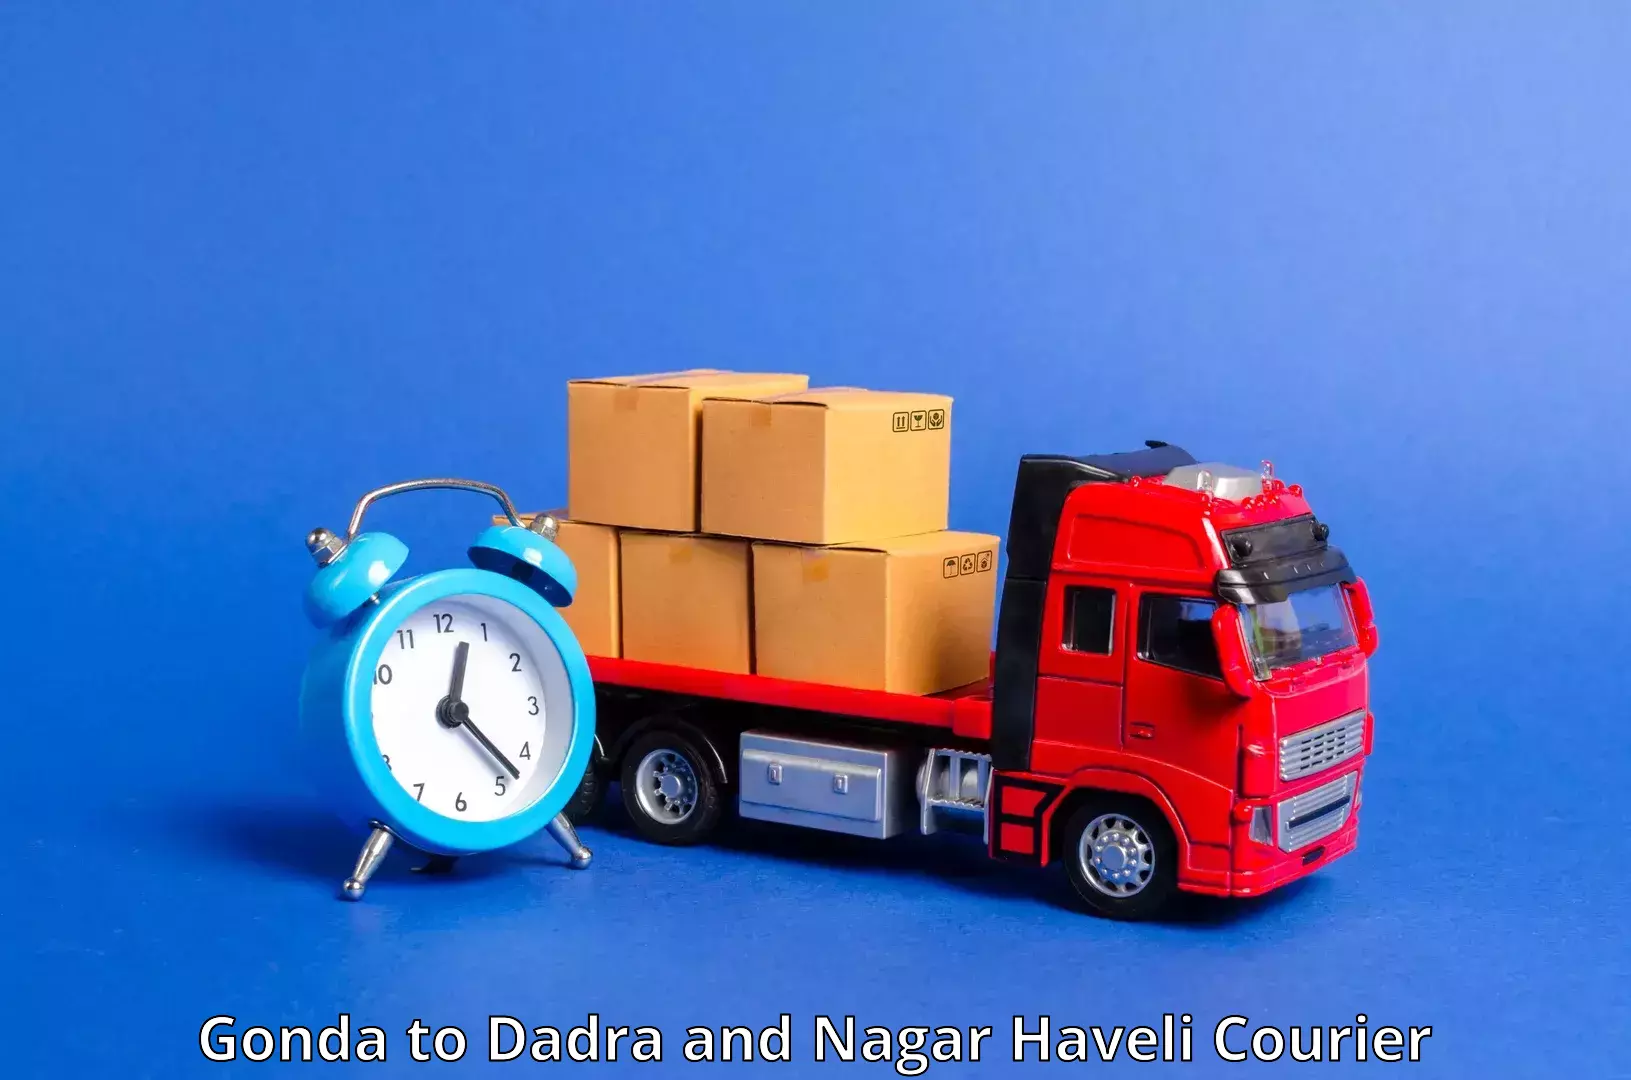 Reliable delivery network Gonda to Dadra and Nagar Haveli